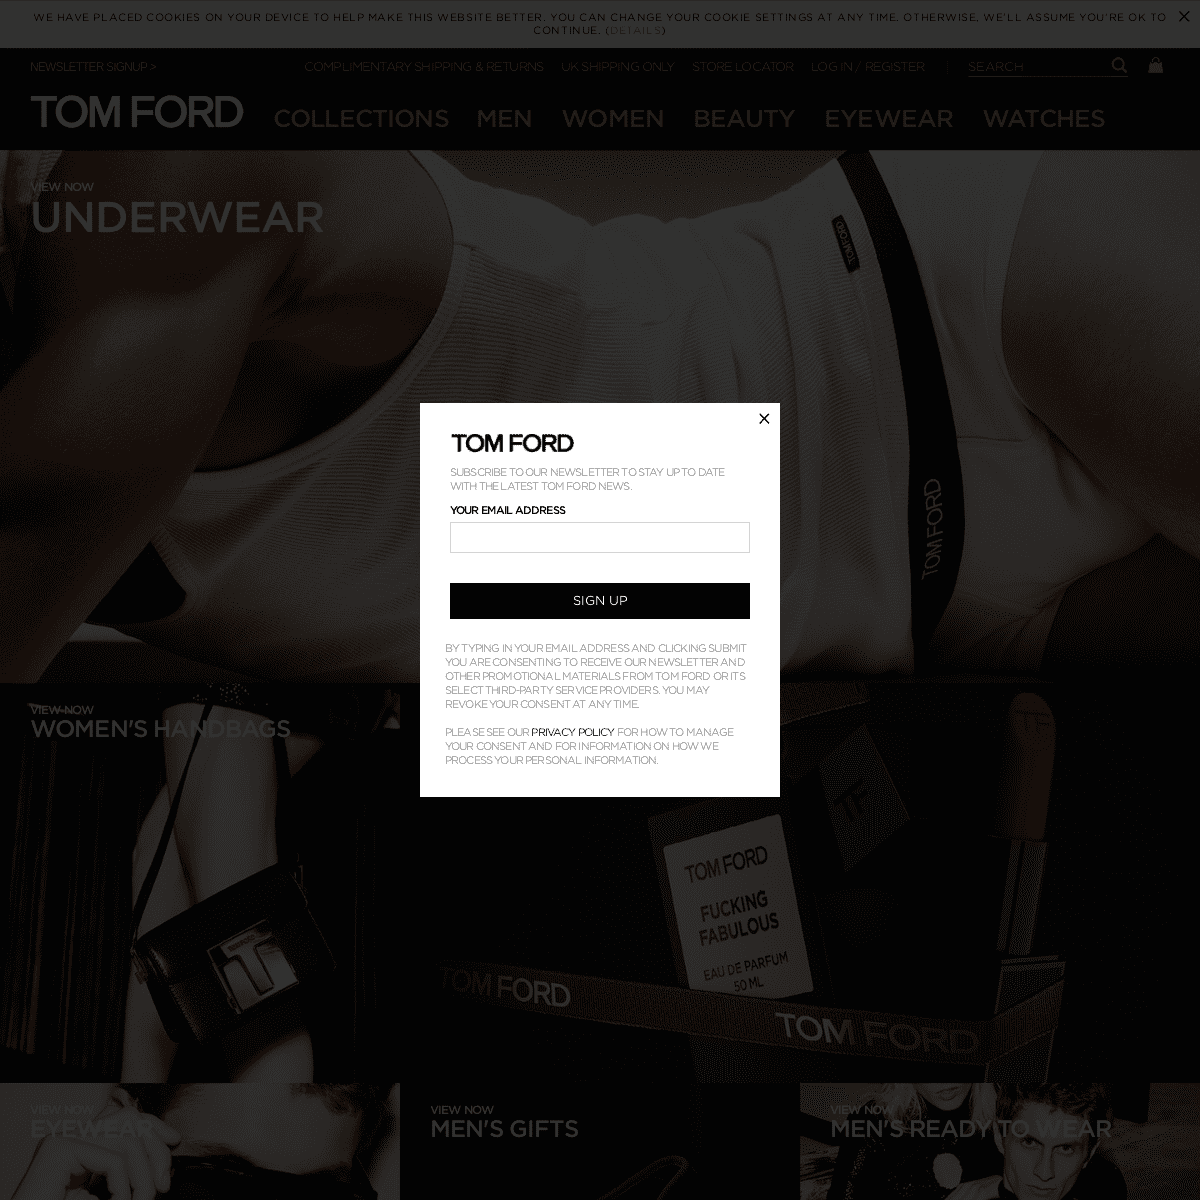 A complete backup of tomford.co.uk